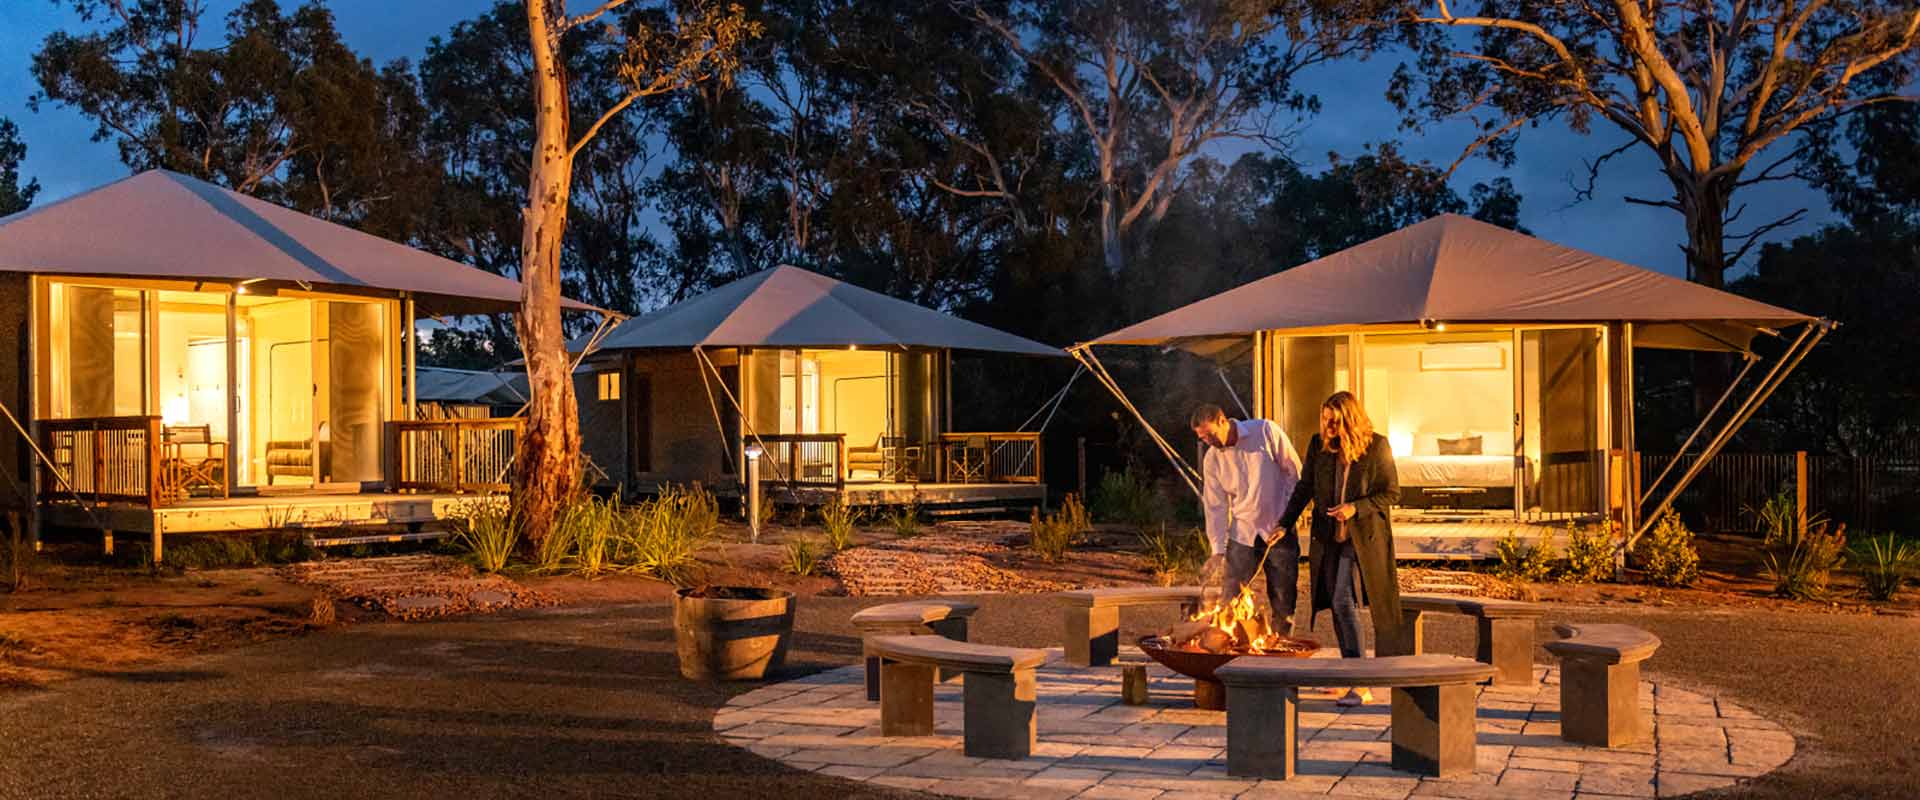 Glamping outback